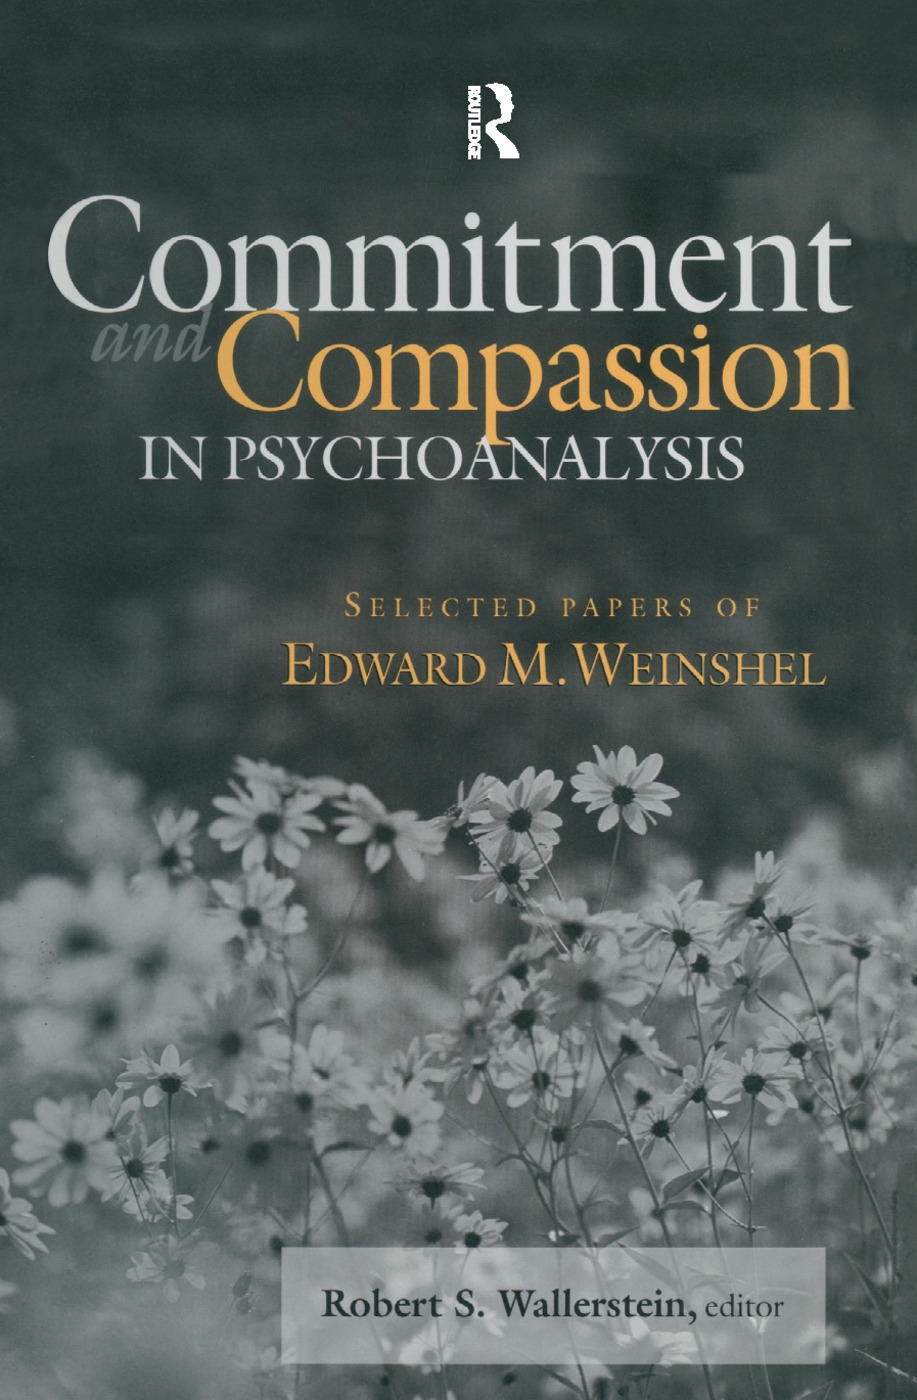 Commitment & Compassion in Psychoanalysis: Selected Papers of Edward M. Weinshel